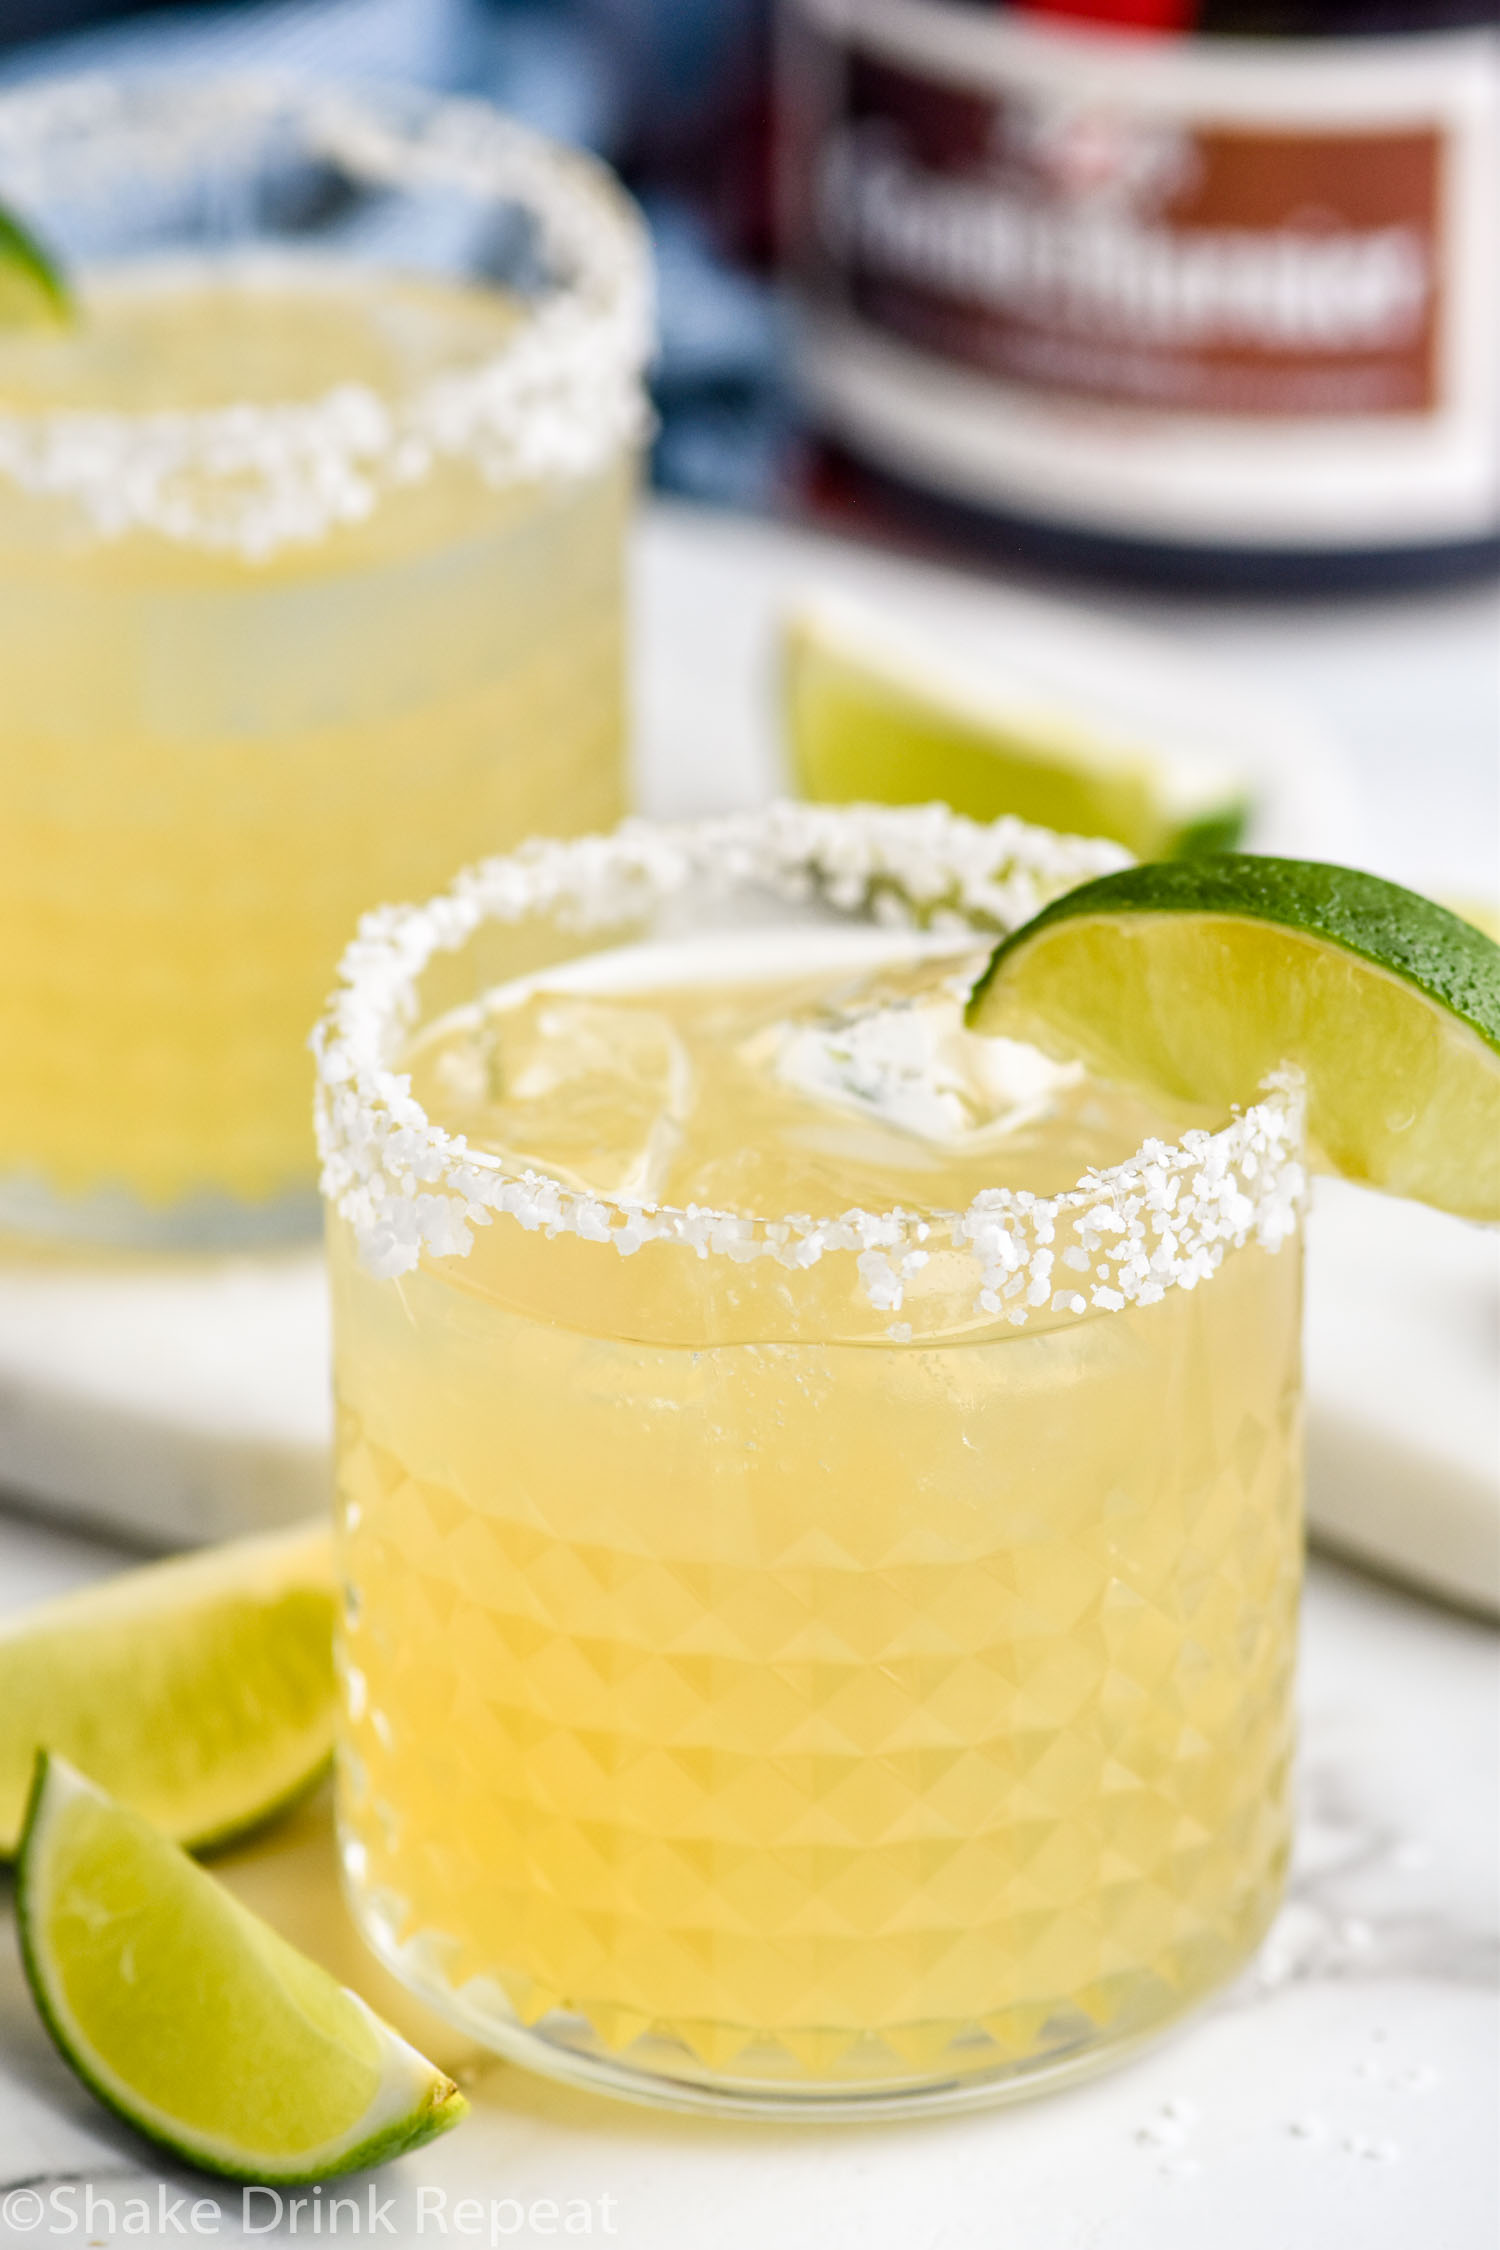 Photo of Grand Marnier Margarita served in a glass of ice with a salted rim and a lime wedge as garnish.